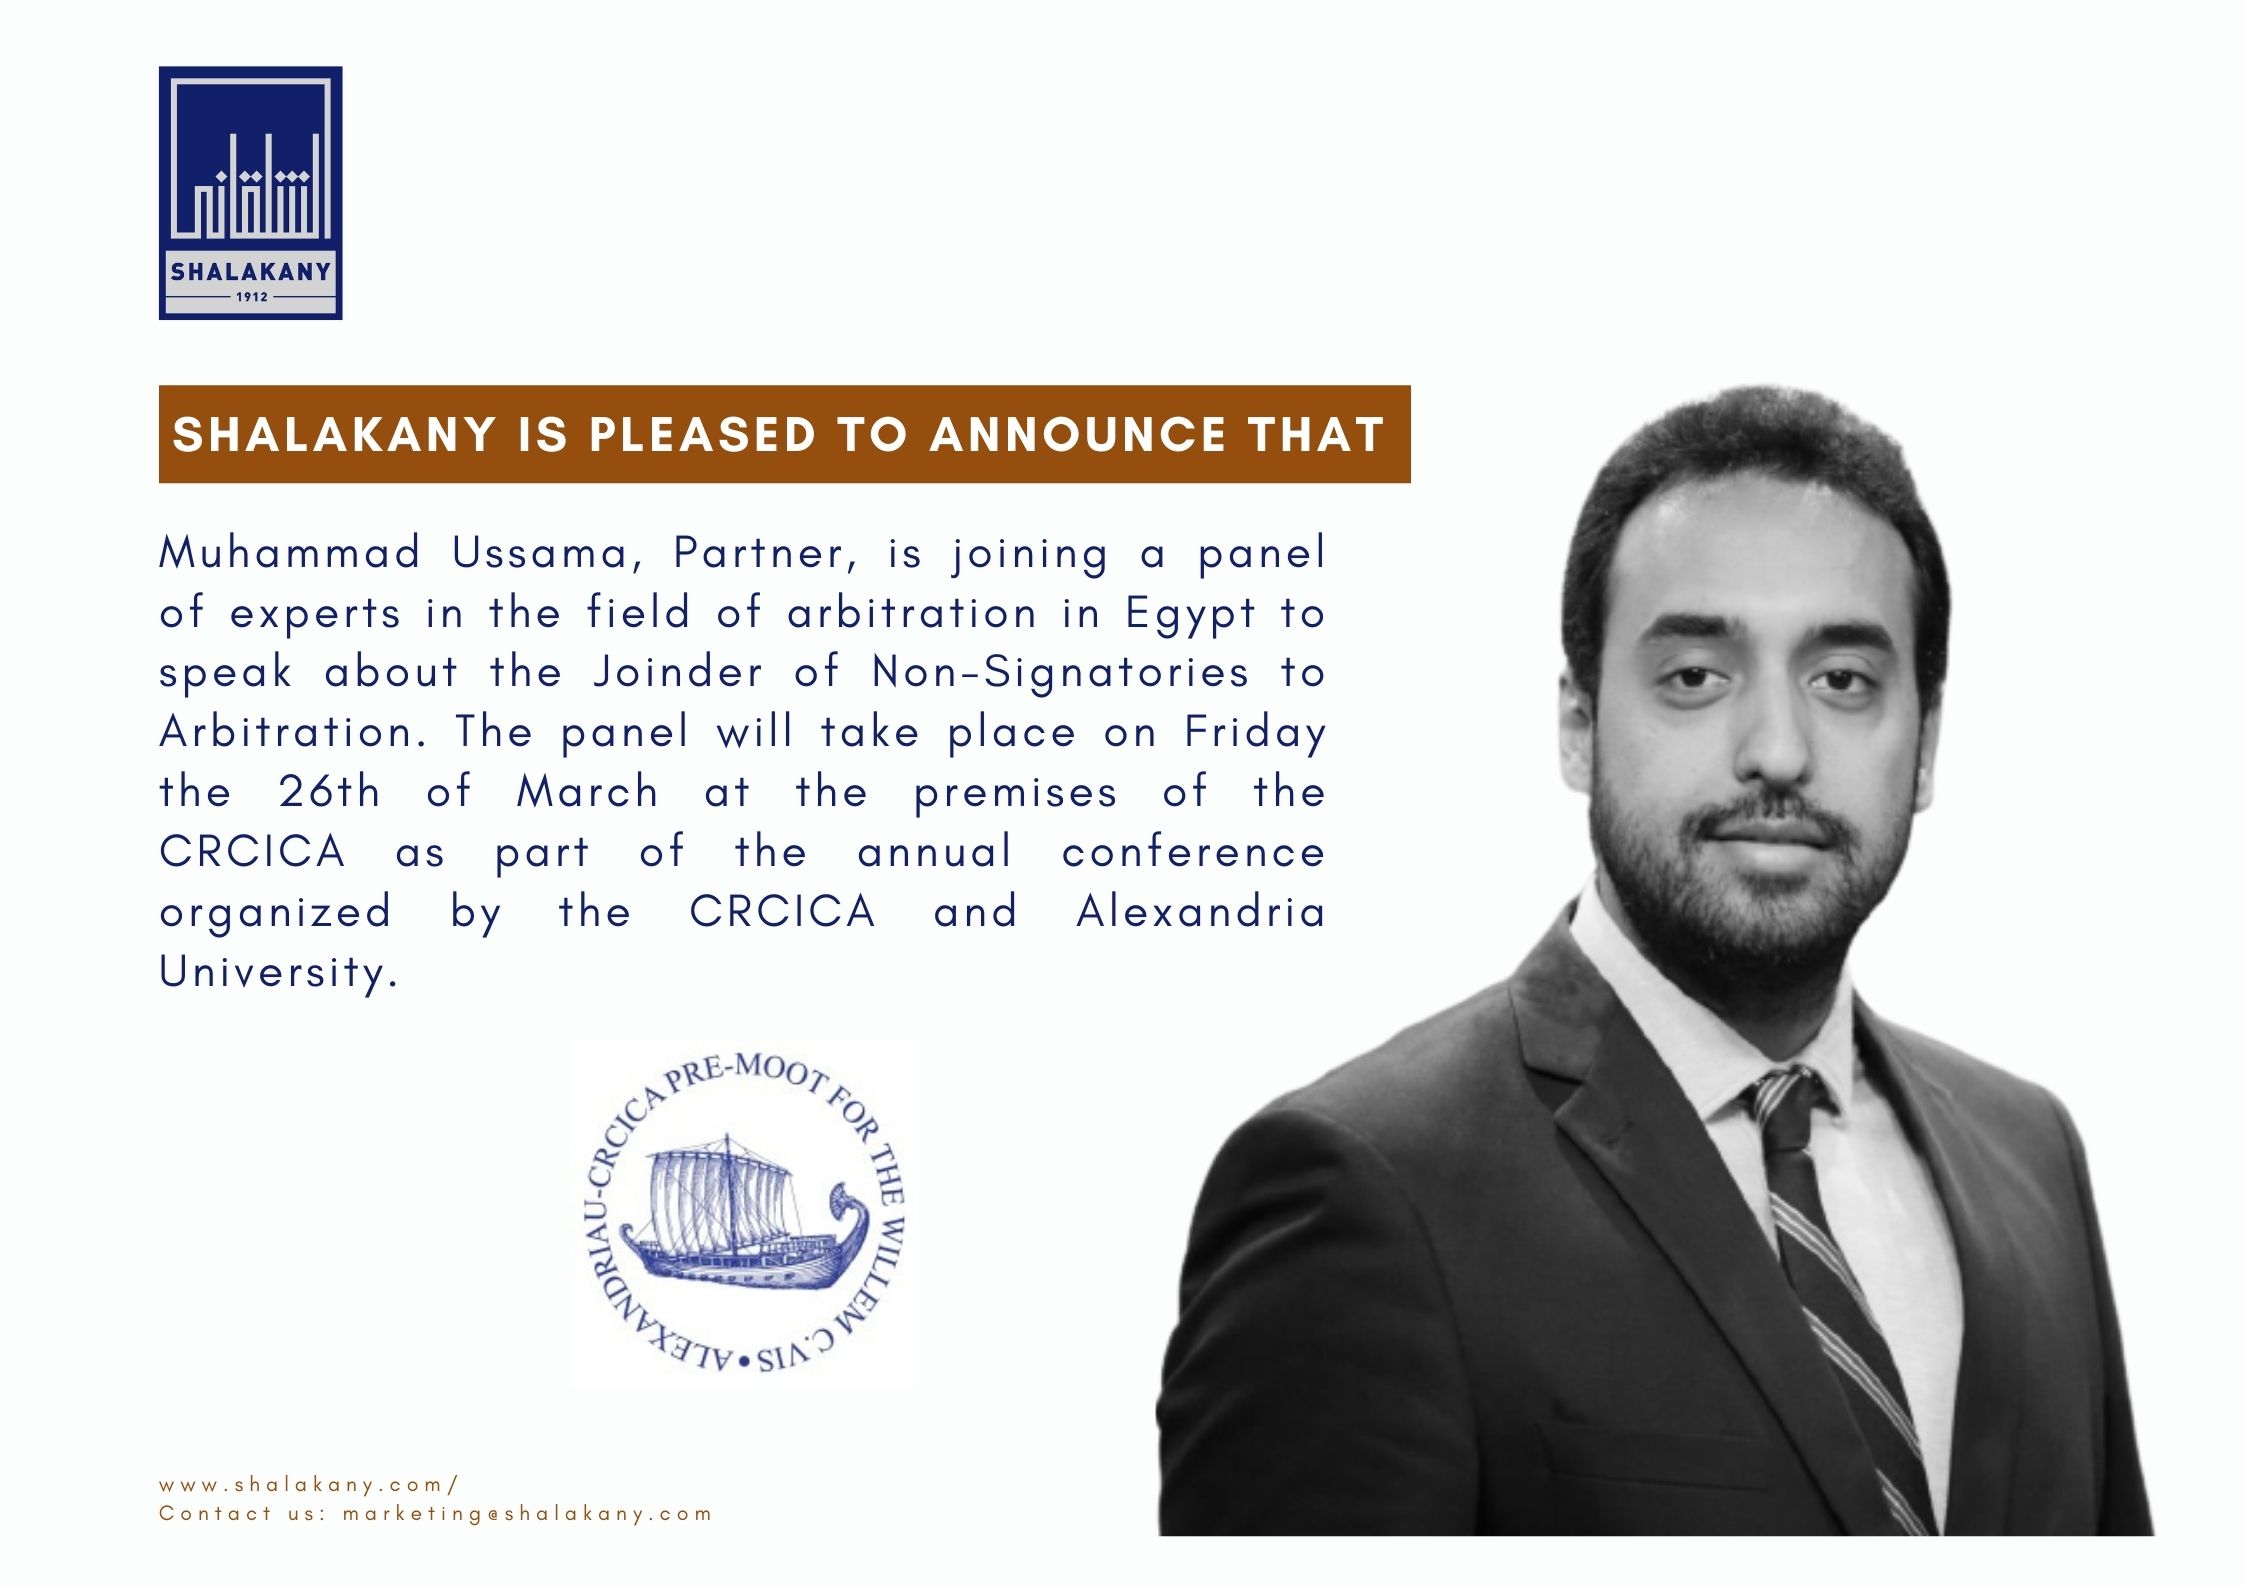 You are currently viewing Shalakany is pleased to announce that Muhammad Ussama, Partner, is joining a panel of experts in the field of arbitration in Egypt to speak about the Joinder of Non-Signatories to Arbitration.